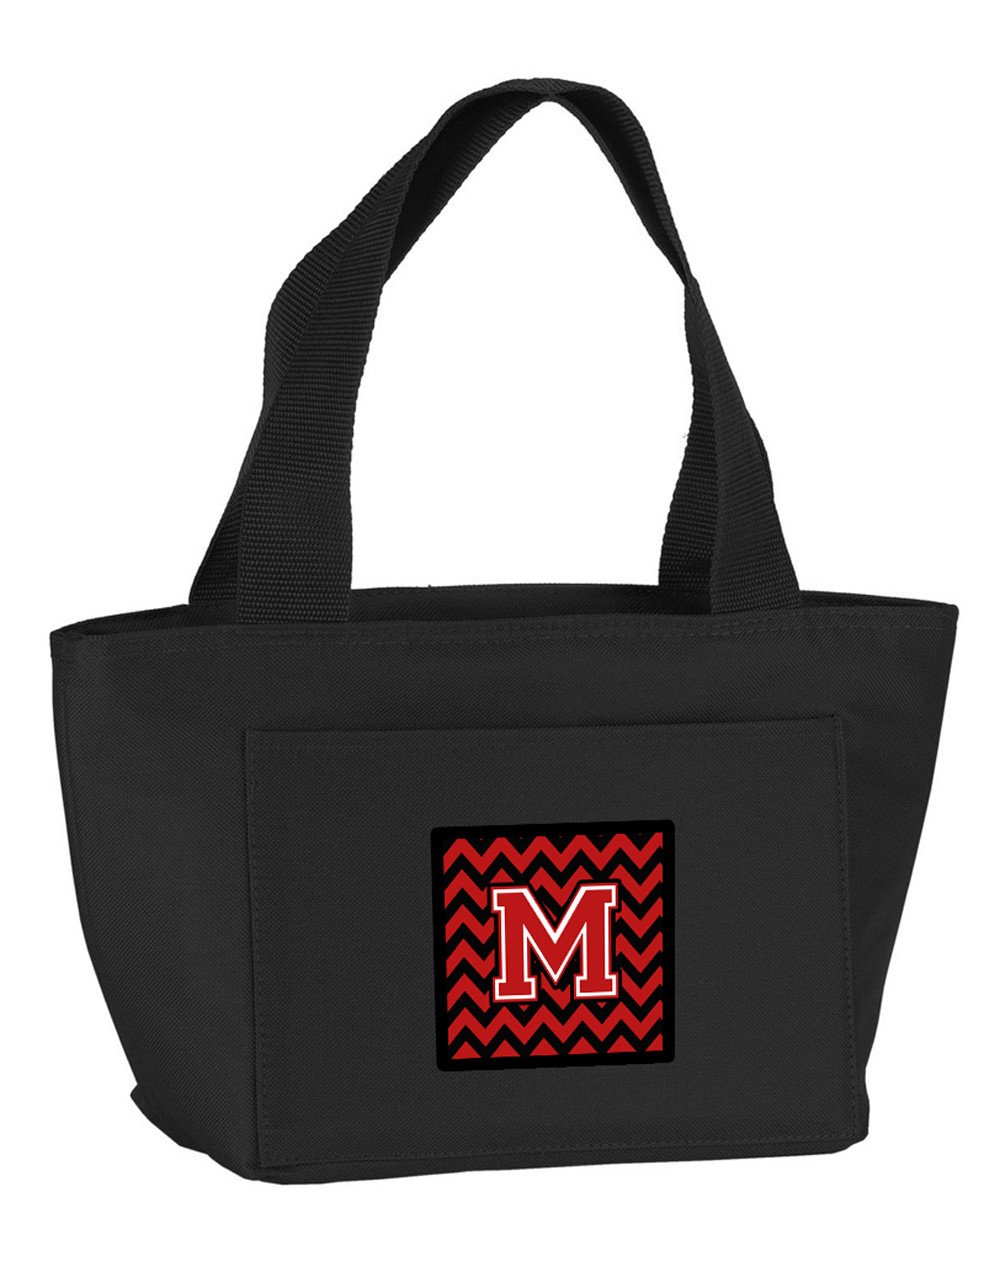 Letter M Chevron Black and Red   Lunch Bag CJ1047-MBK-8808 by Caroline's Treasures